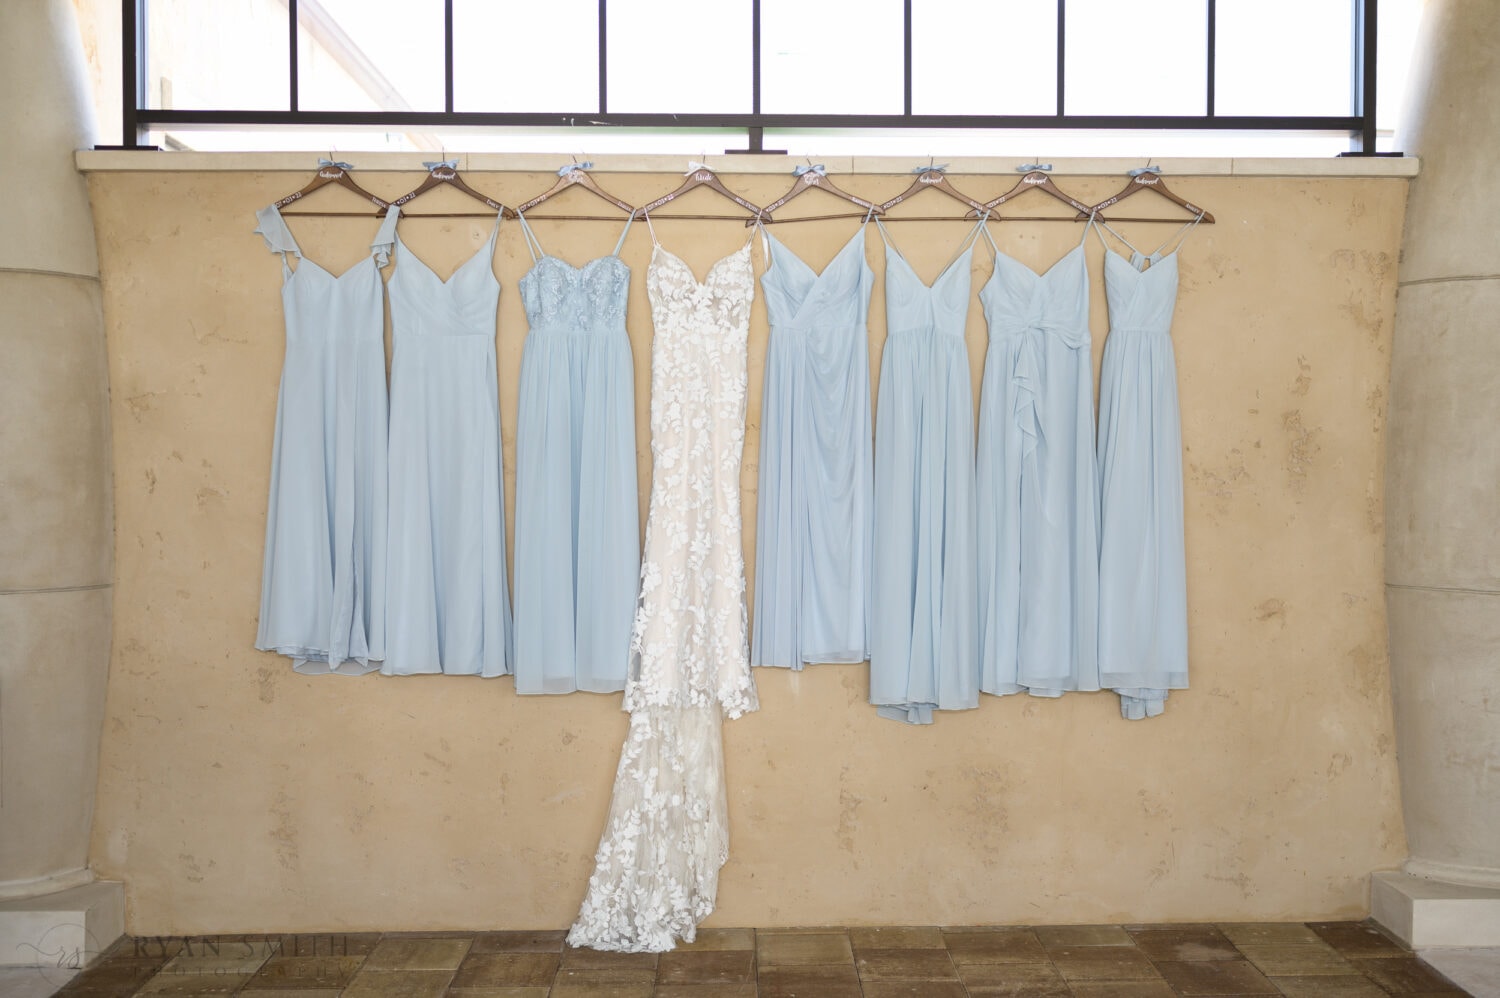 Bride and bridesmaid dressing hanging in the courtyard - 21 Main Events